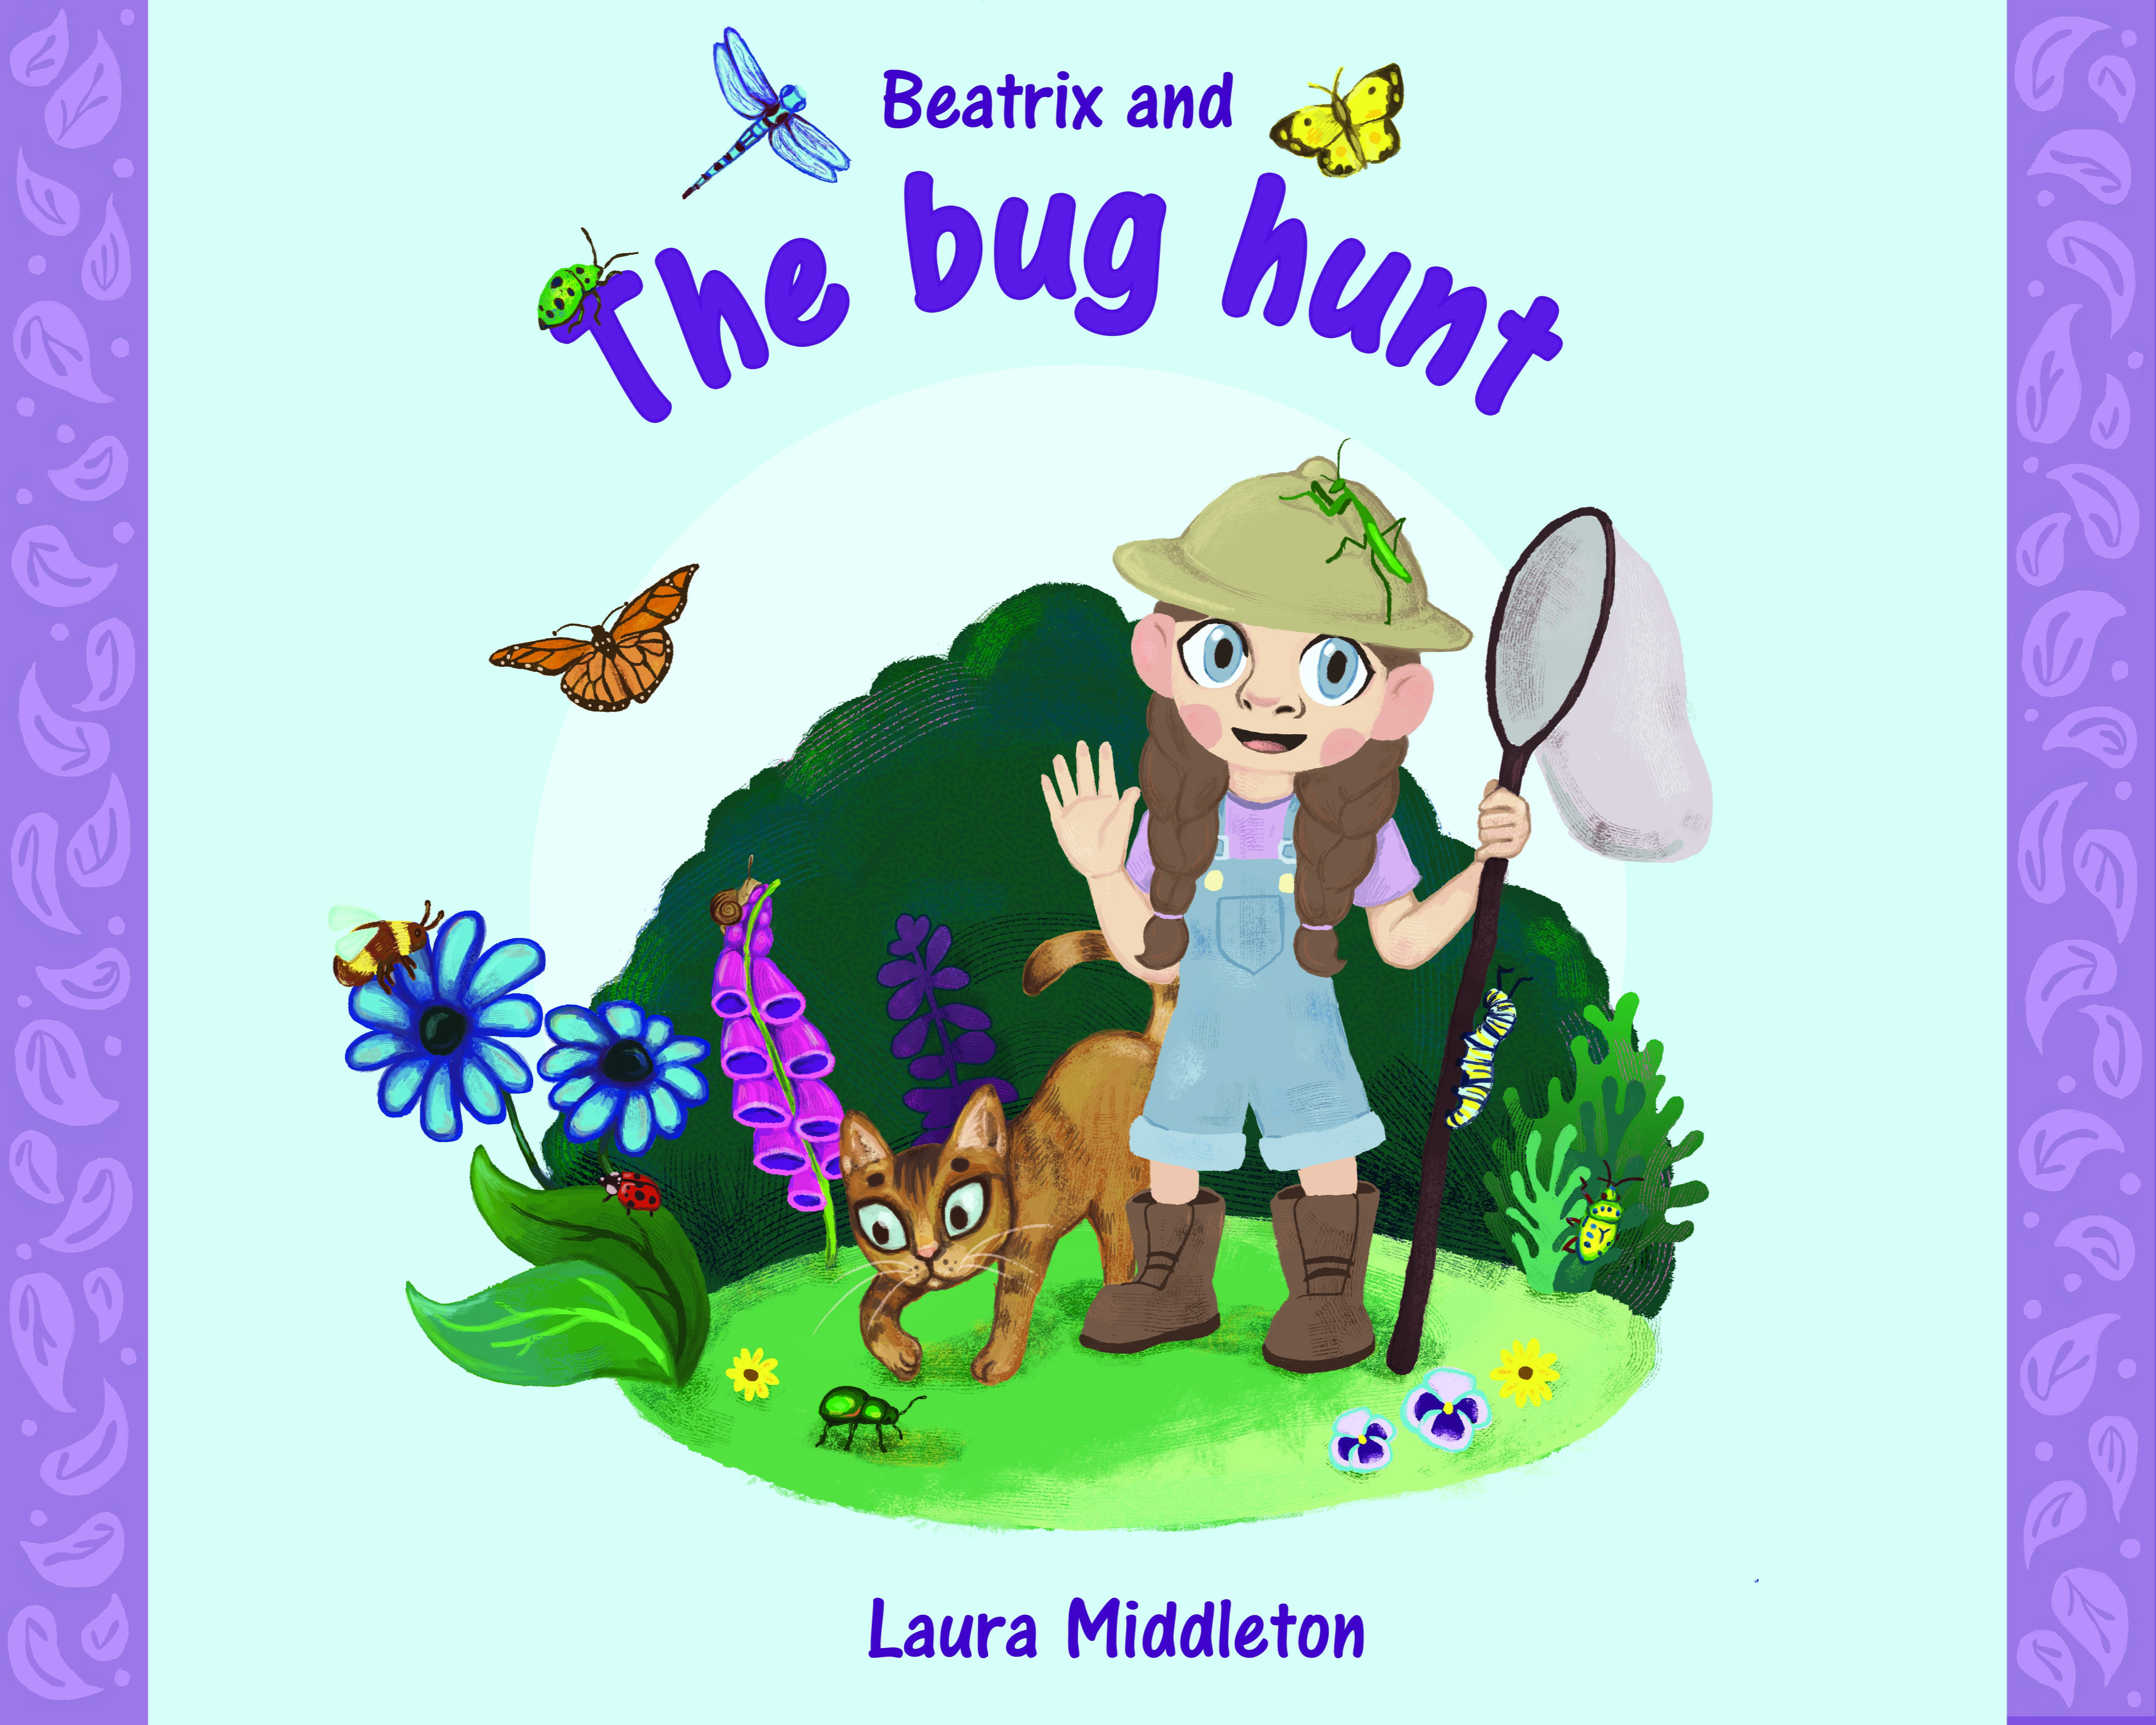 An illustration of a book cover, titled 'Beatrix and the Bug Hunt', a small girl with a net is in a lively, bug inhabited garden accompanied by a cat. 